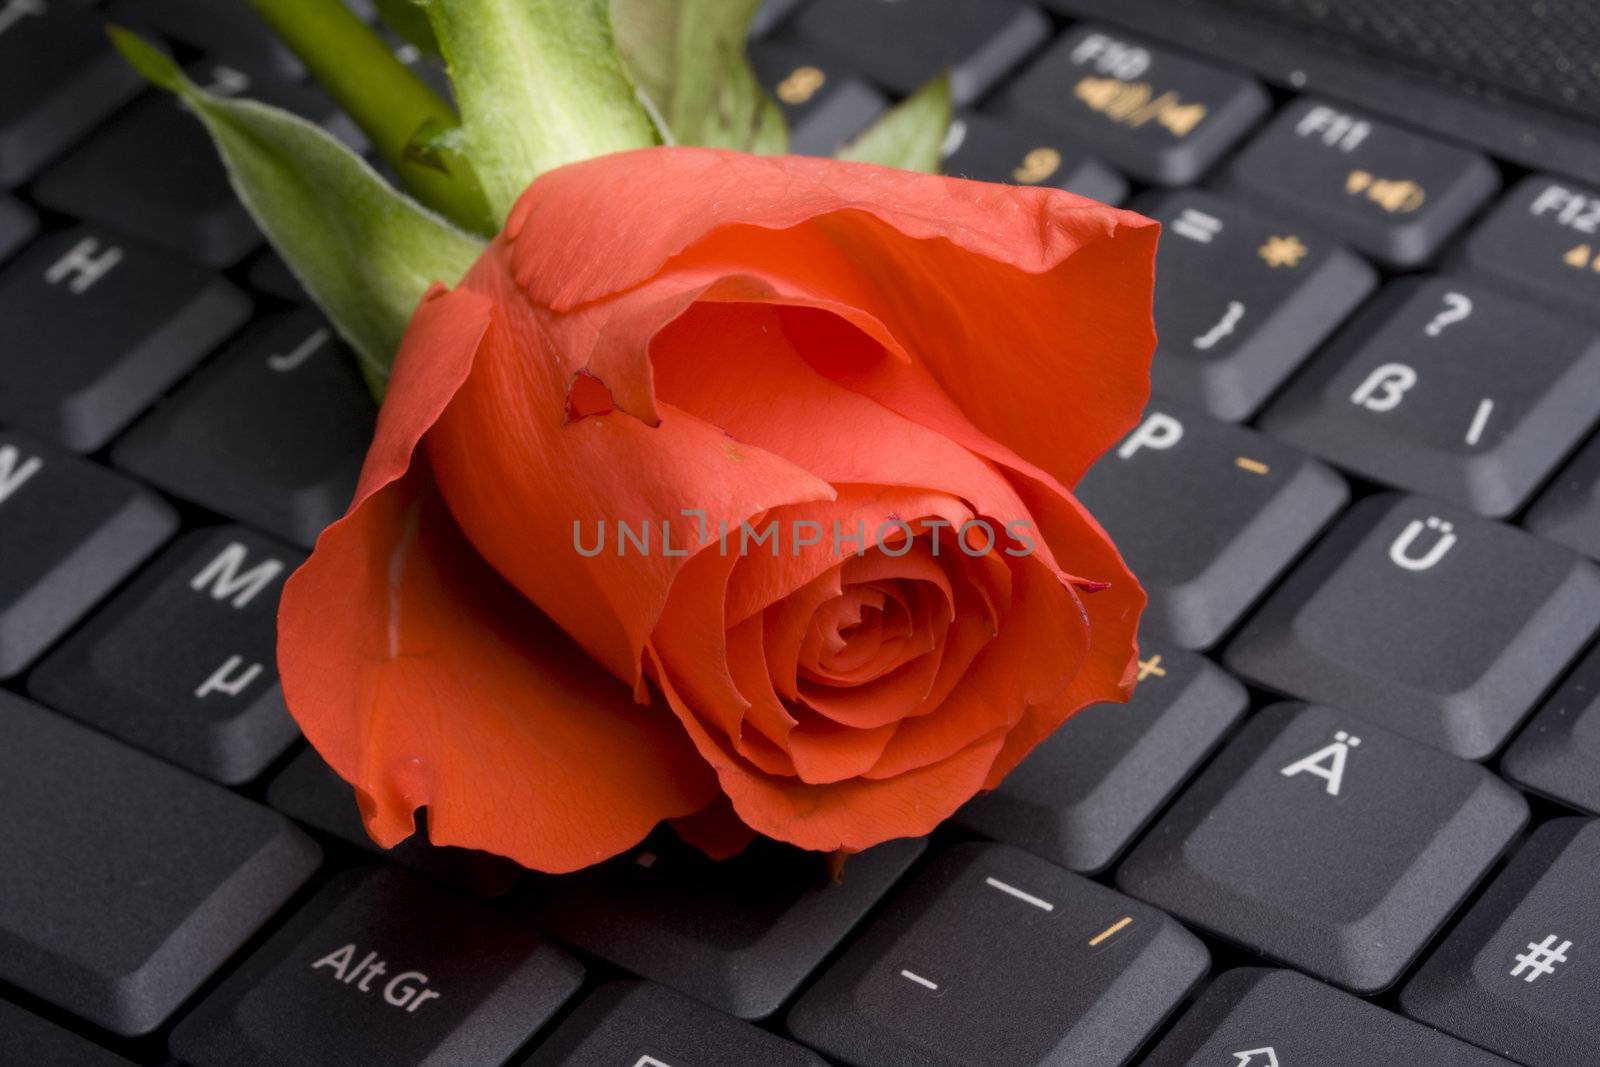 red rose on a notebook computer keyboard